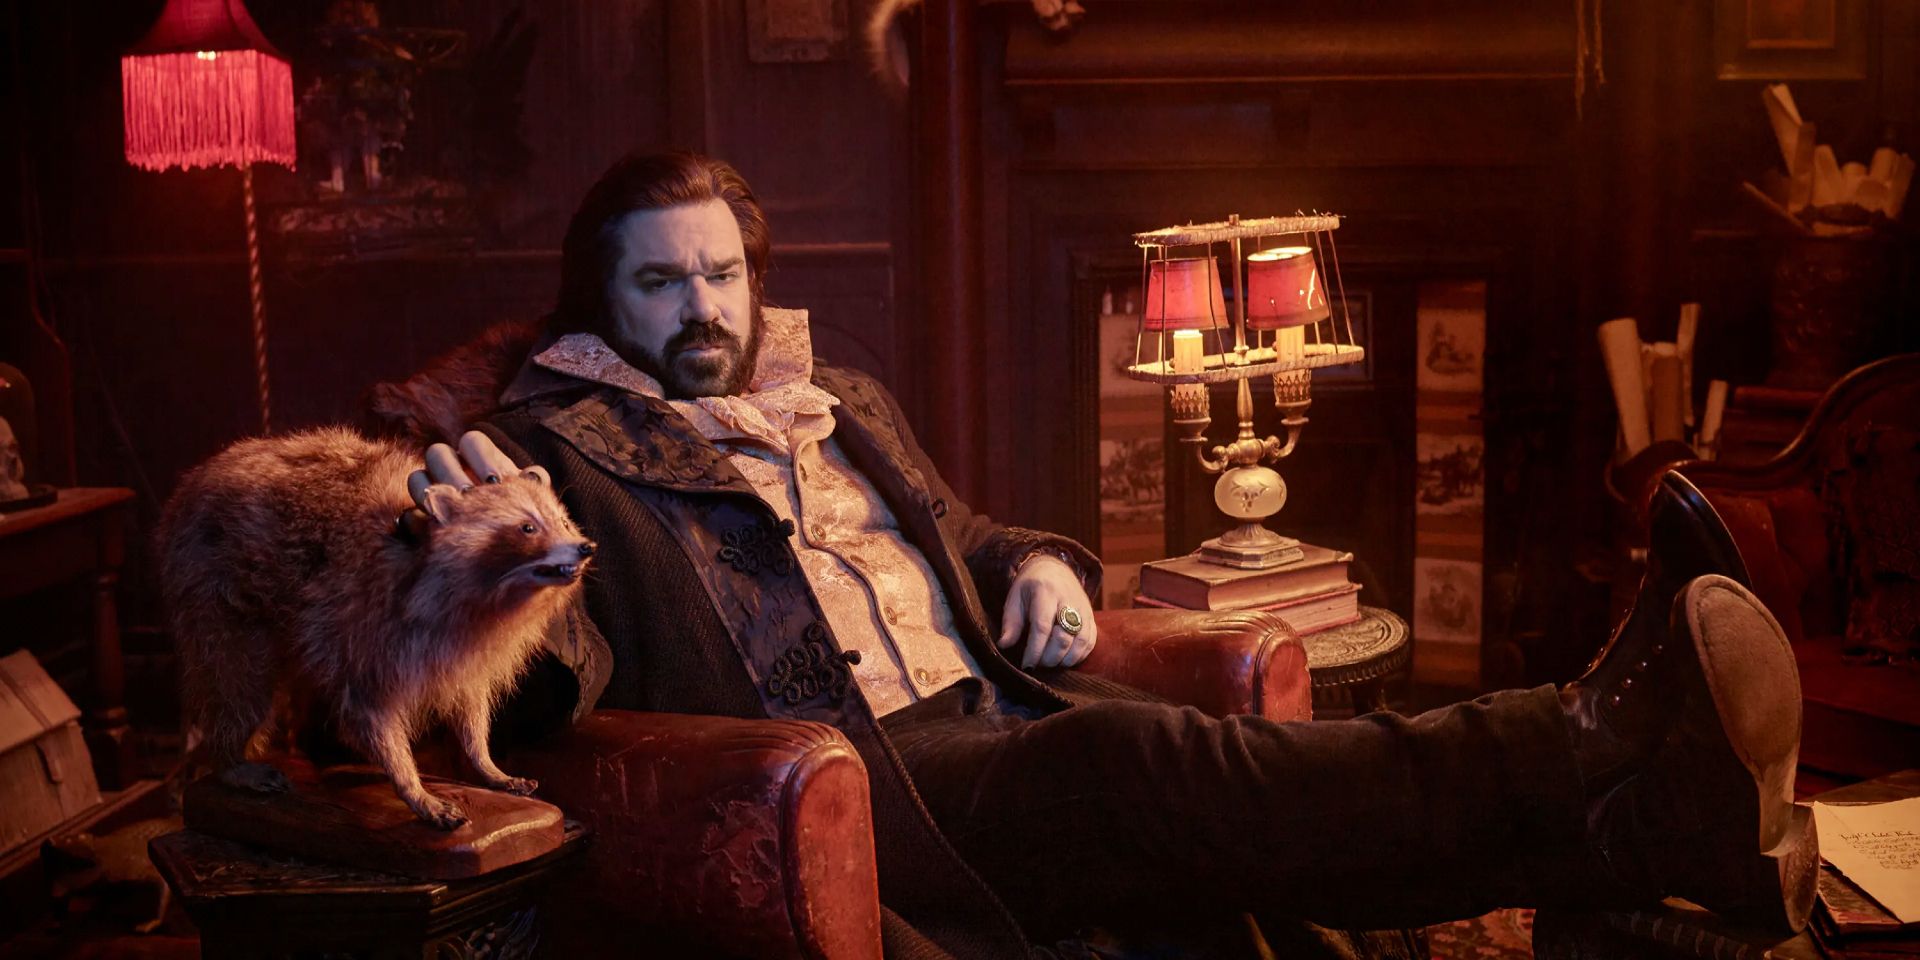 Laszlo sitting in a chair in What We Do in the Shadows